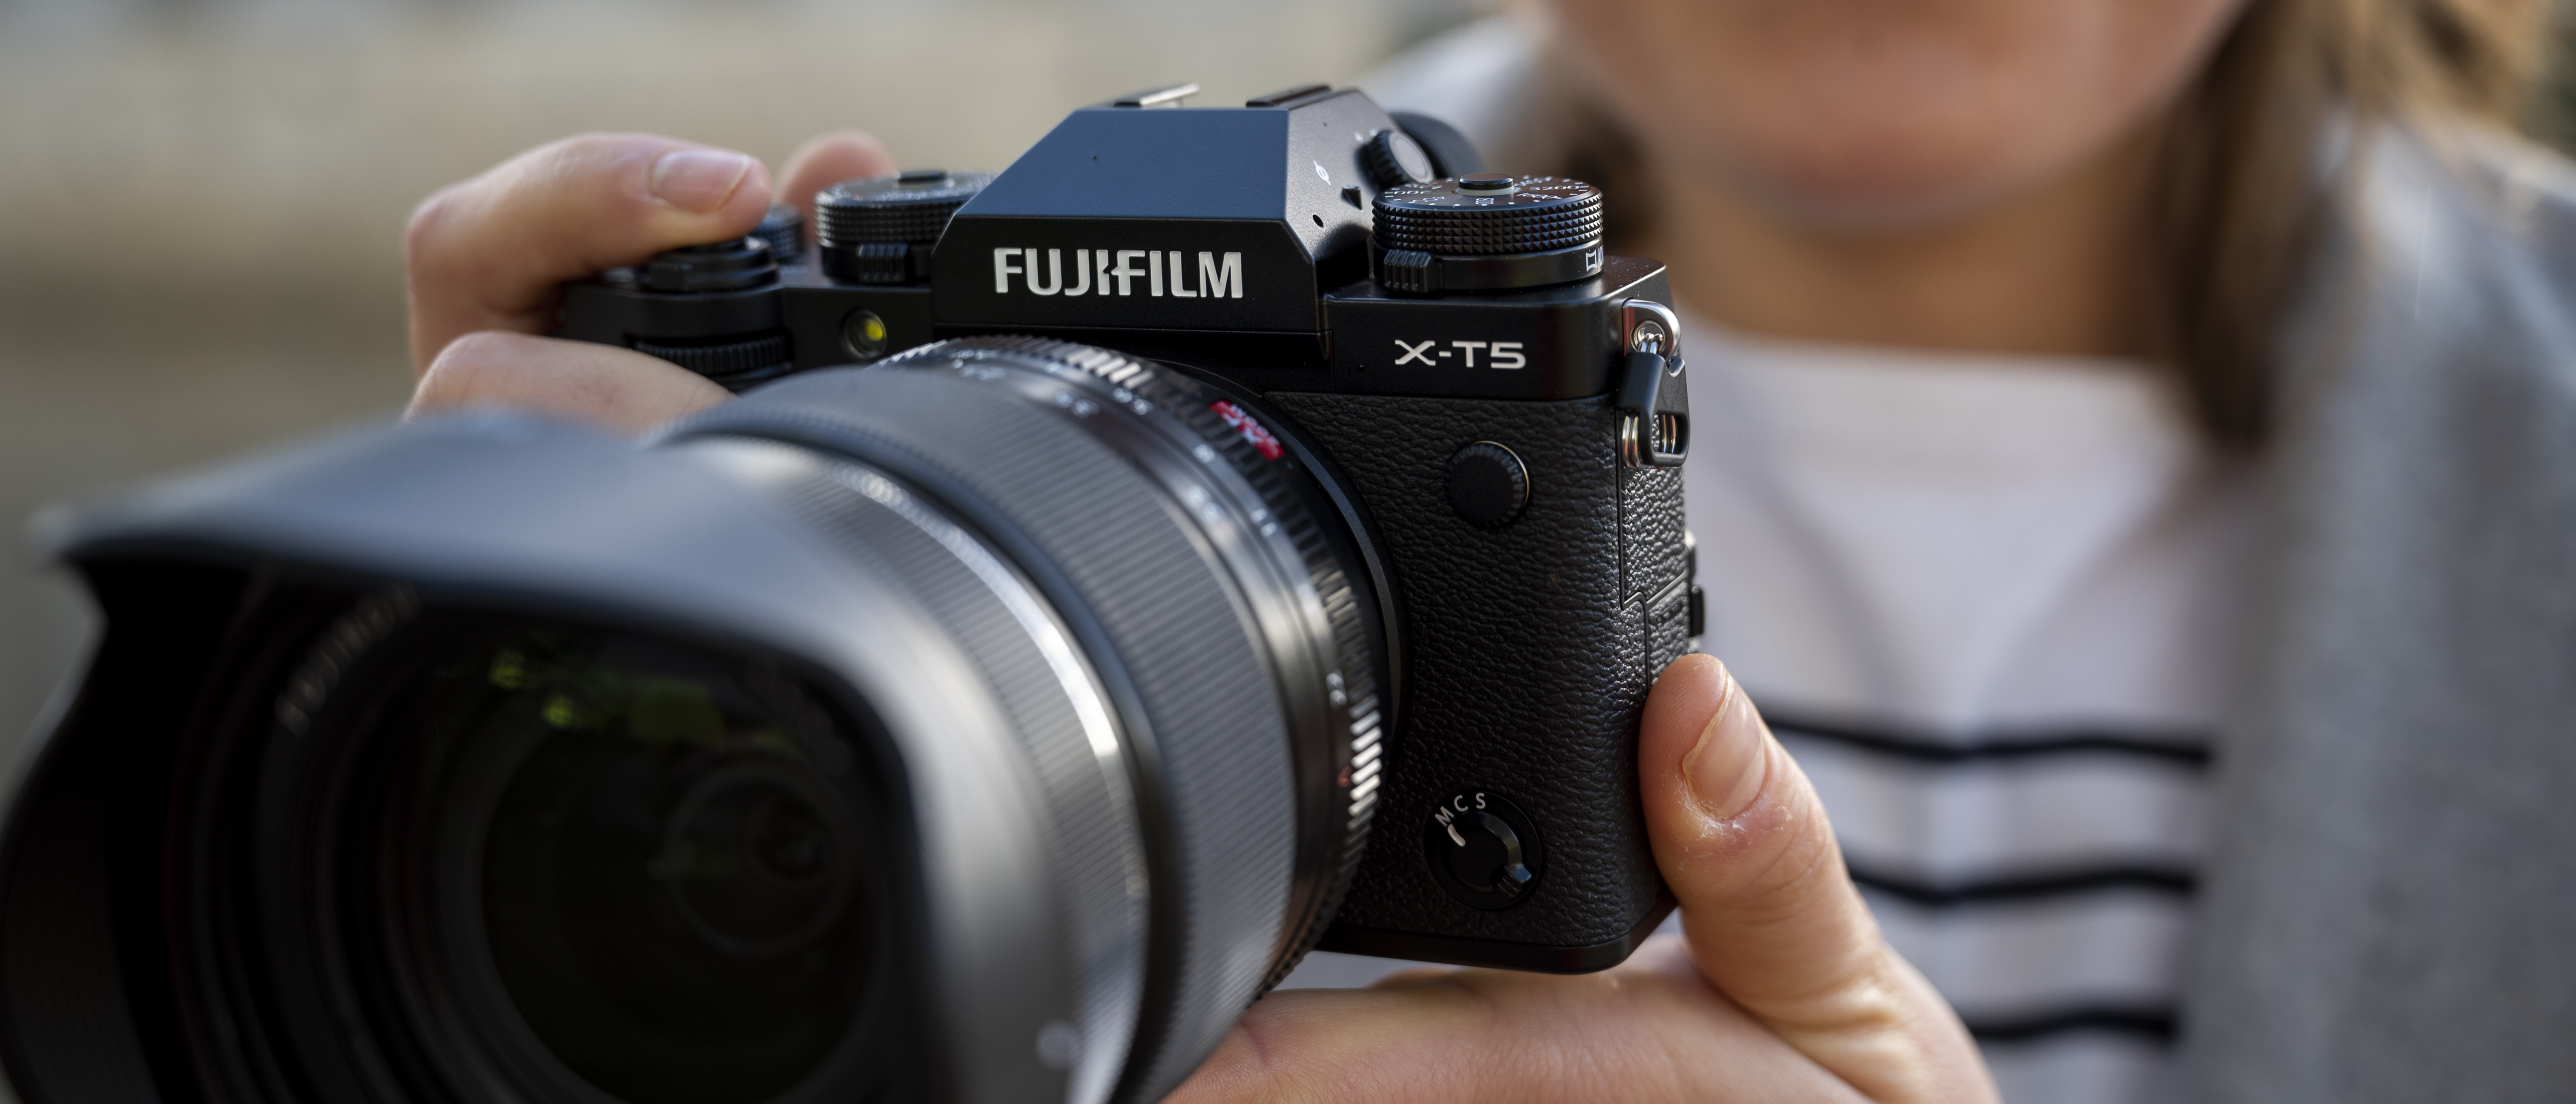 Fujifilm X-T5 in-depth review: Digital Photography Review